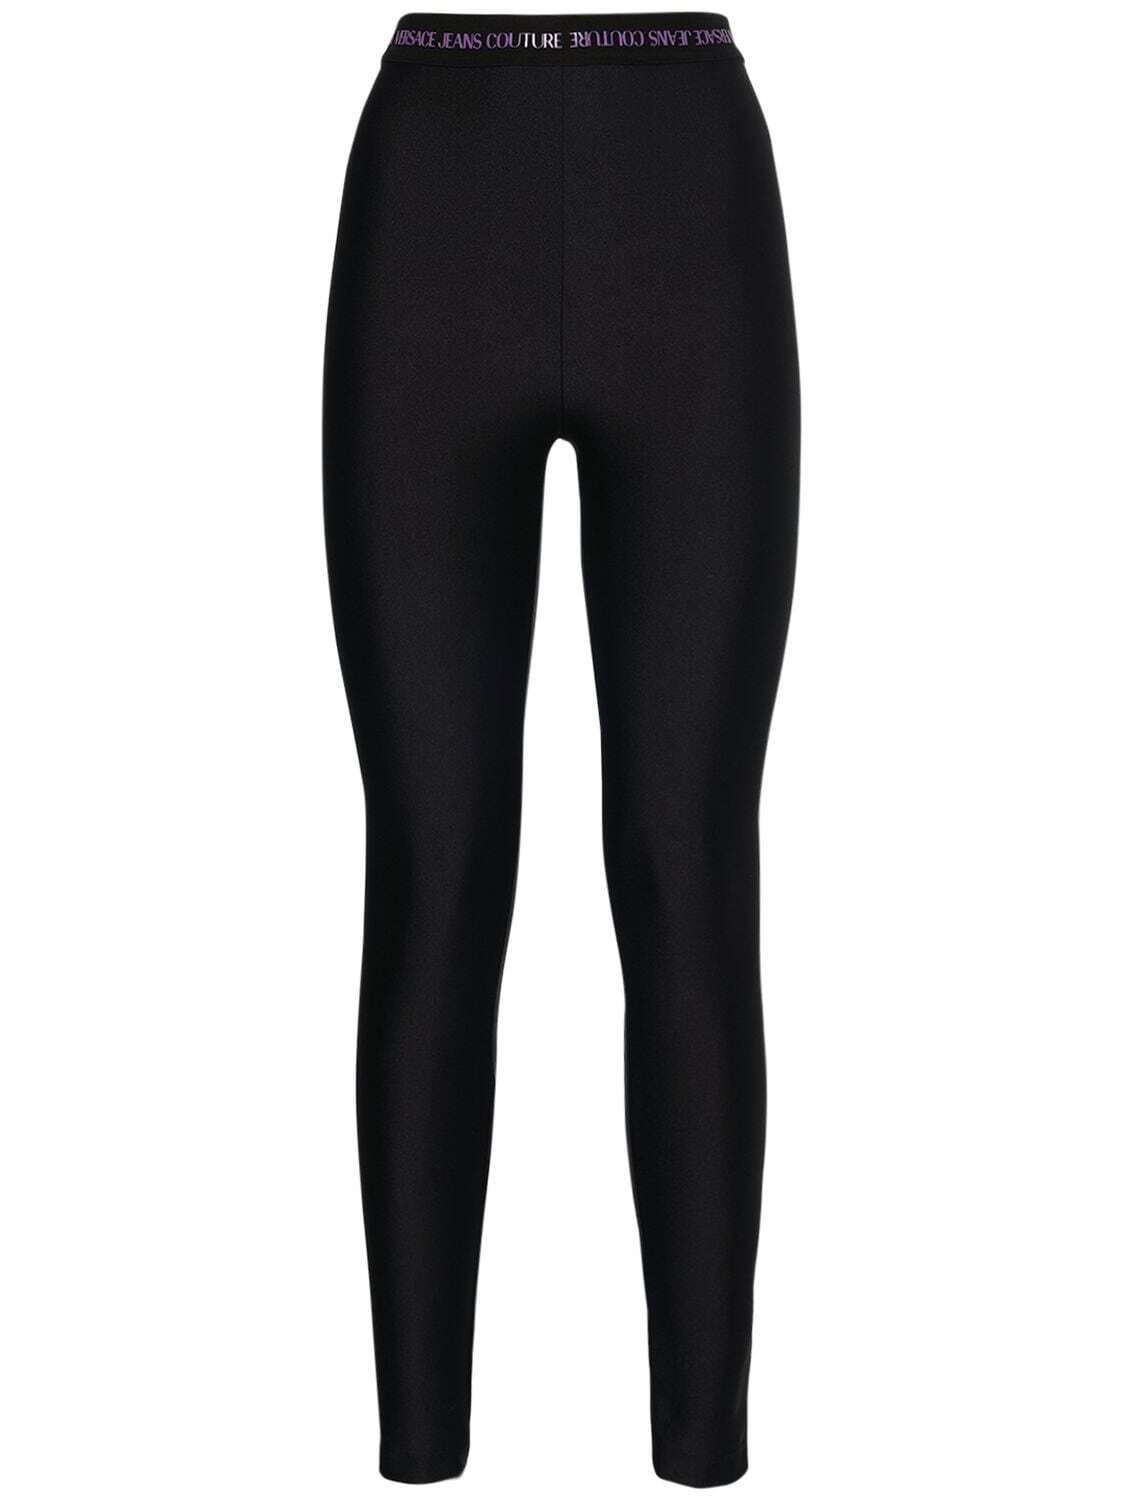 VERSACE JEANS COUTURE Logo Shiny Lycra Leggings in black